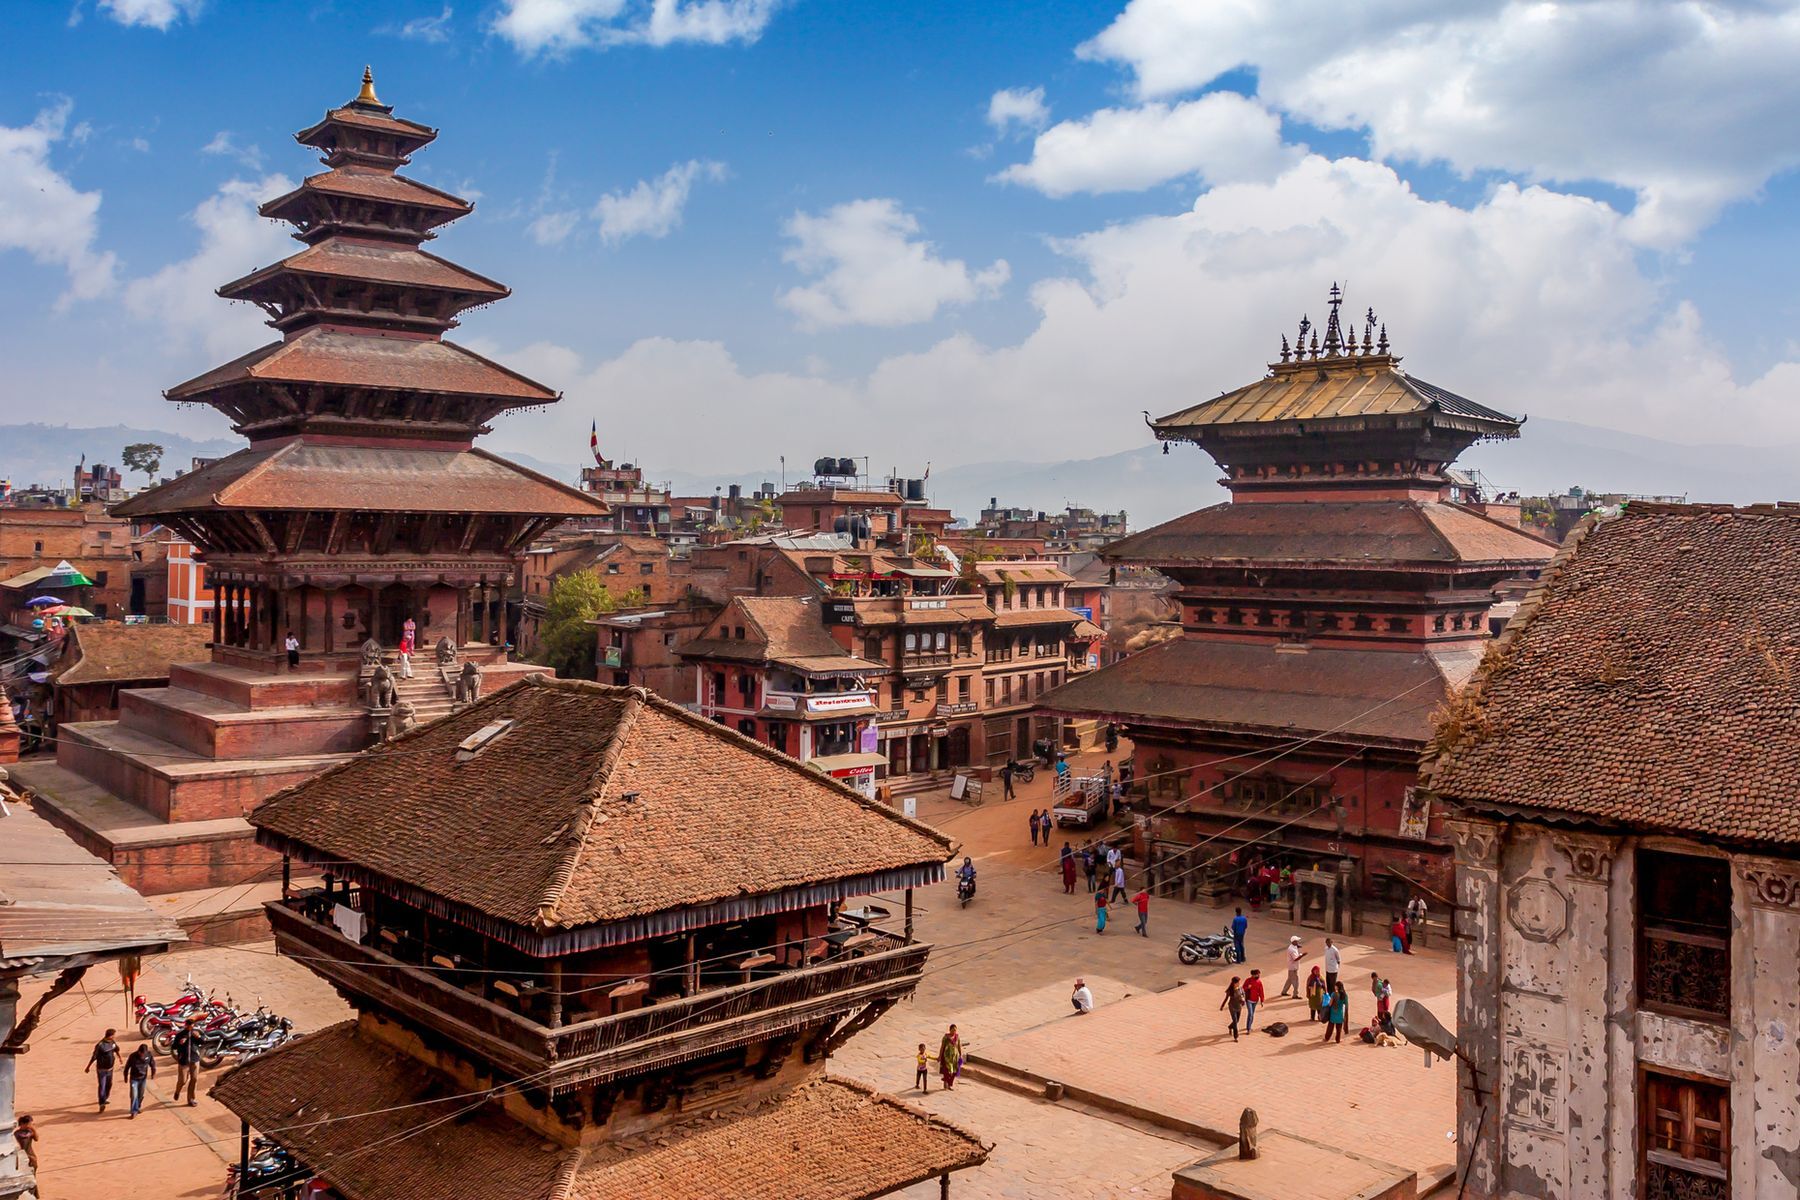 <p>Located in a valley bordered by the Himalaya Mountains, the city of Kathmandu is the historical, cultural, and economic hub of Nepal. It costs approximately <a href="https://www.numbeo.com/cost-of-living/in/Kathmandu" rel="noreferrer noopener">60%</a> <a href="https://www.numbeo.com/cost-of-living/in/Kathmandu" rel="noreferrer noopener">less</a> to live there than in France, and the region is ideal for hiking, a budget-friendly activity if ever there was one. Hikers can practise their sport at the <a href="https://dnpwc.gov.np/en/conservation-area-detail/76/" rel="noreferrer noopener">Langtang National Park</a>, for instance. Located less than 100 kilometres (62 miles) from Kathmandu, it’s Nepal’s second-largest park and features a multitude of trails. City-loving tourists may prefer a visit to <a href="https://www.lonelyplanet.com/nepal/kathmandu/attractions/durbar-square/a/poi-sig/386867/357144" rel="noreferrer noopener">Durbar</a> <a href="https://www.lonelyplanet.com/nepal/kathmandu/attractions/durbar-square/a/poi-sig/386867/357144" rel="noreferrer noopener">Square</a> where they’ll find multiple palaces, temples, and pagodas.</p>